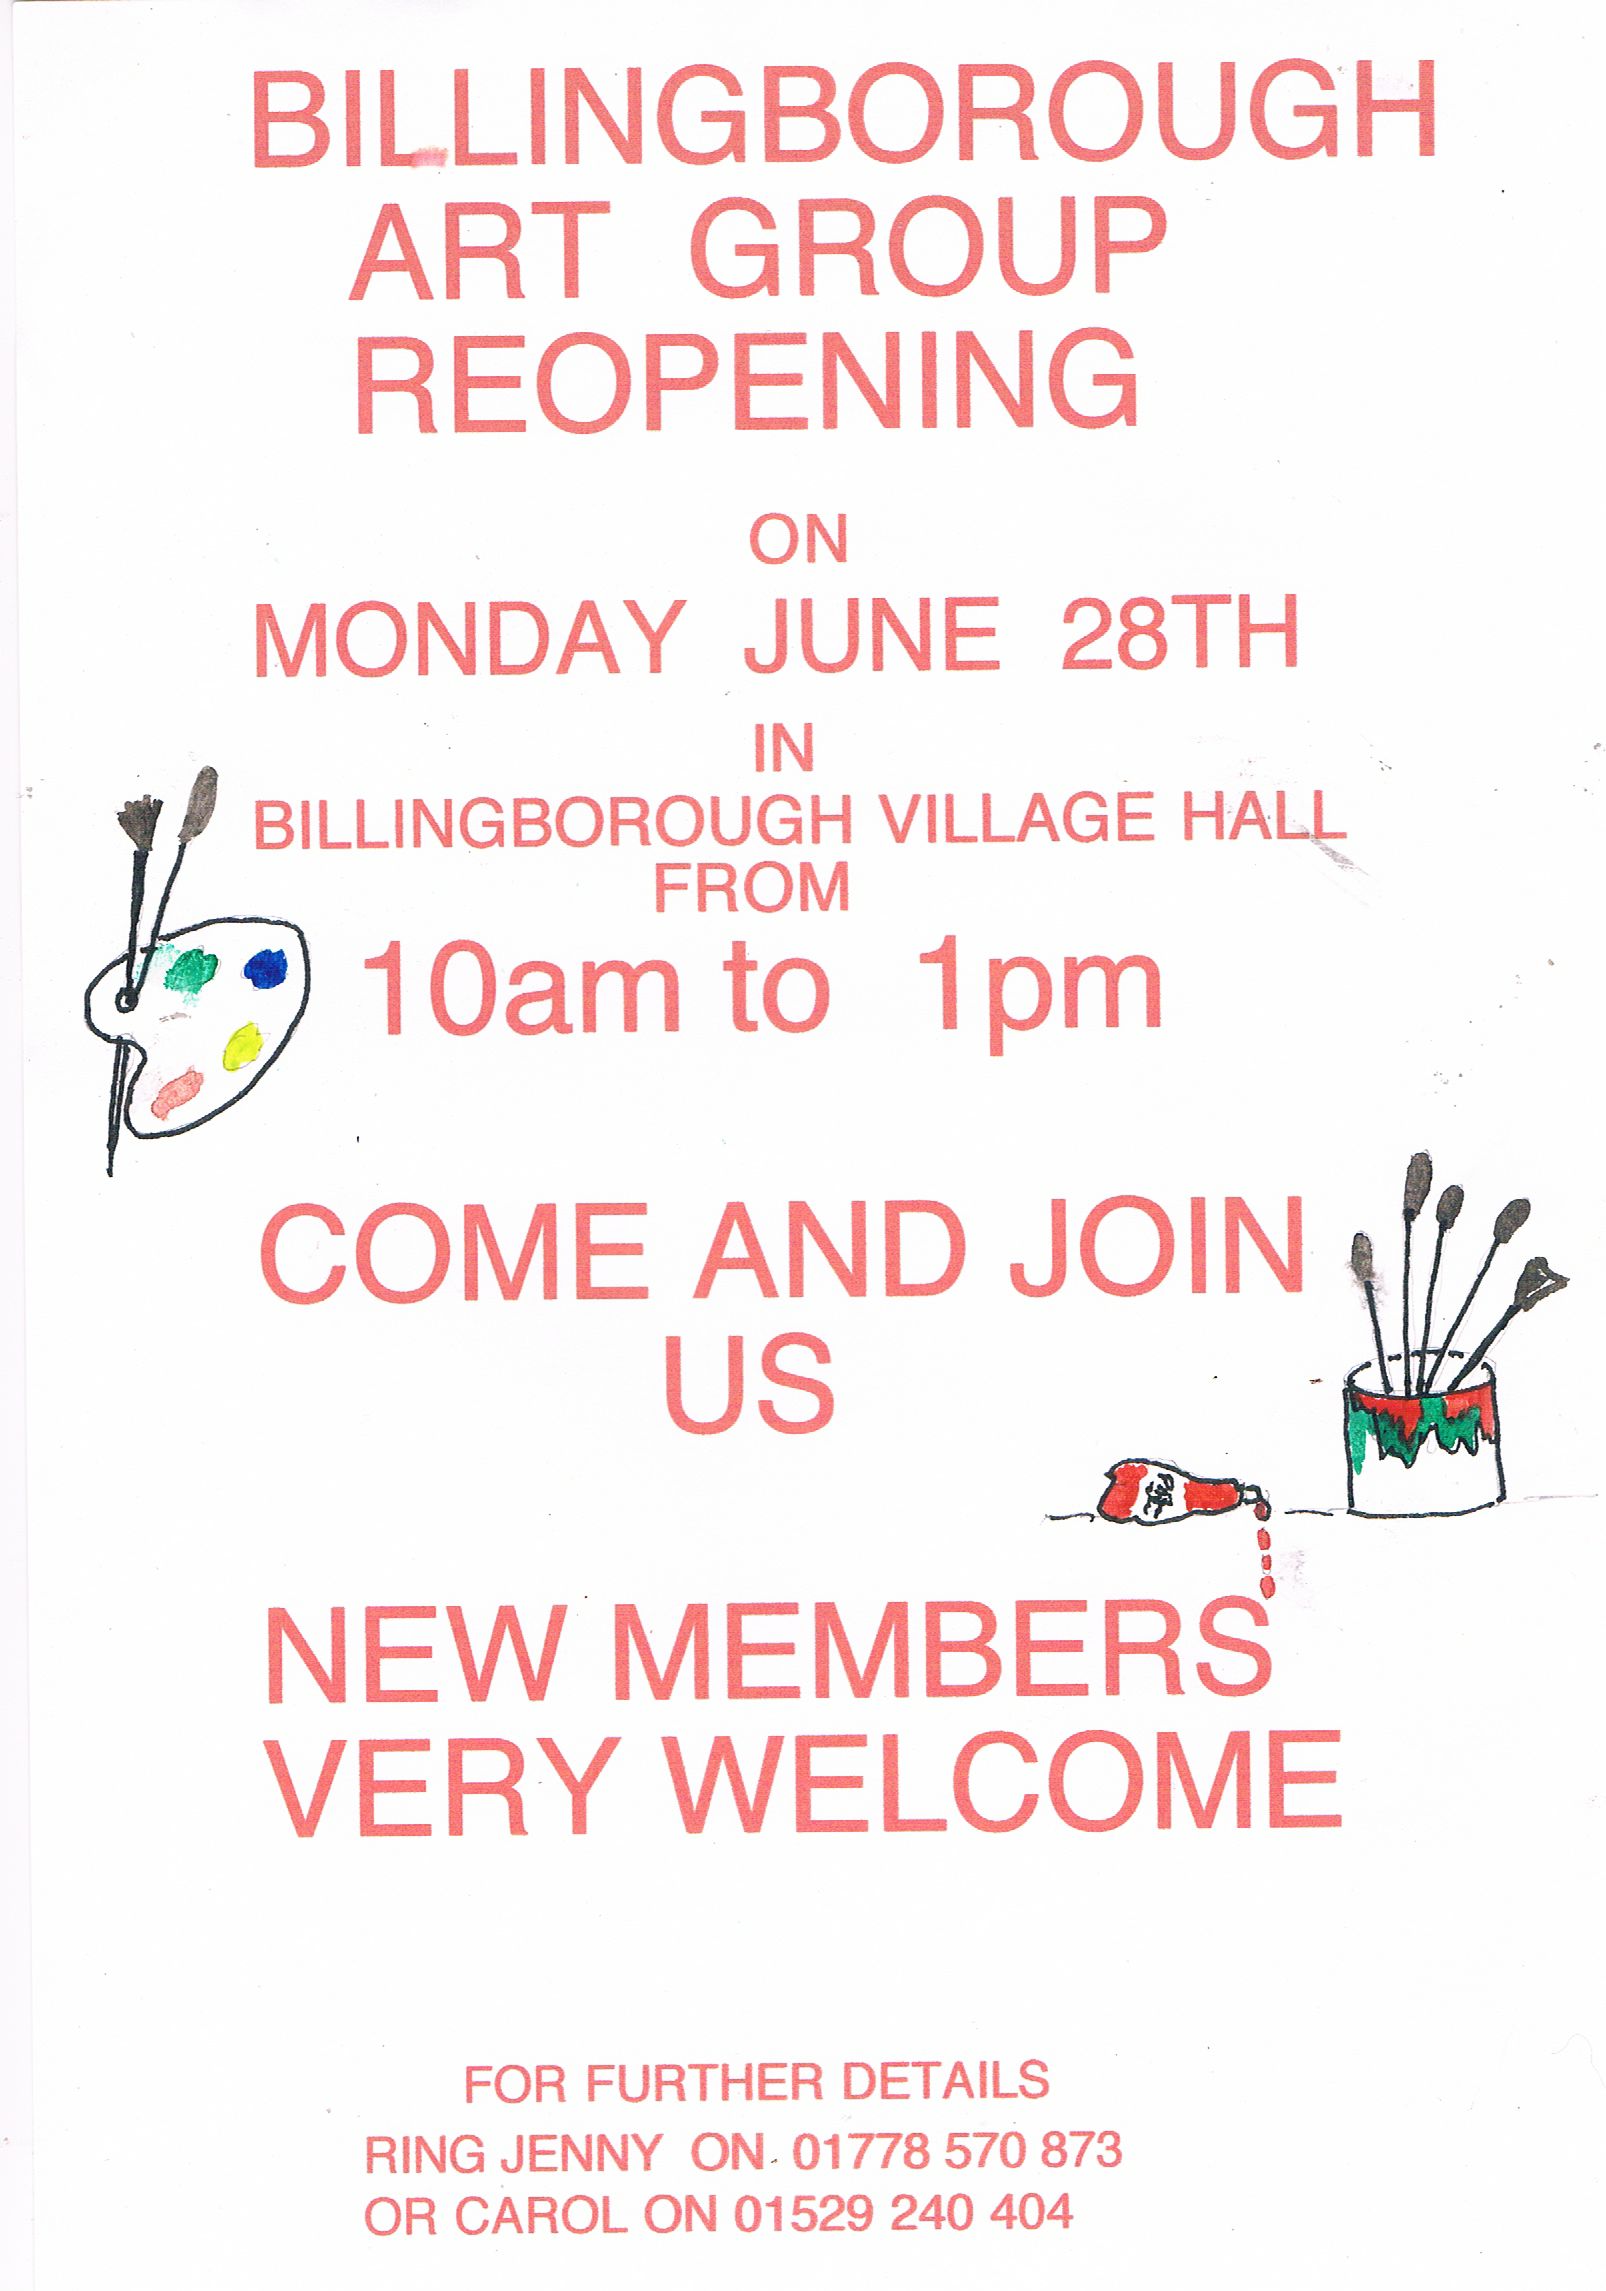 Billingborough Art Club Reopens on Mon June 28th From 10am -1pm for details ring Jenny 01778 570873
Carol 01529 240404